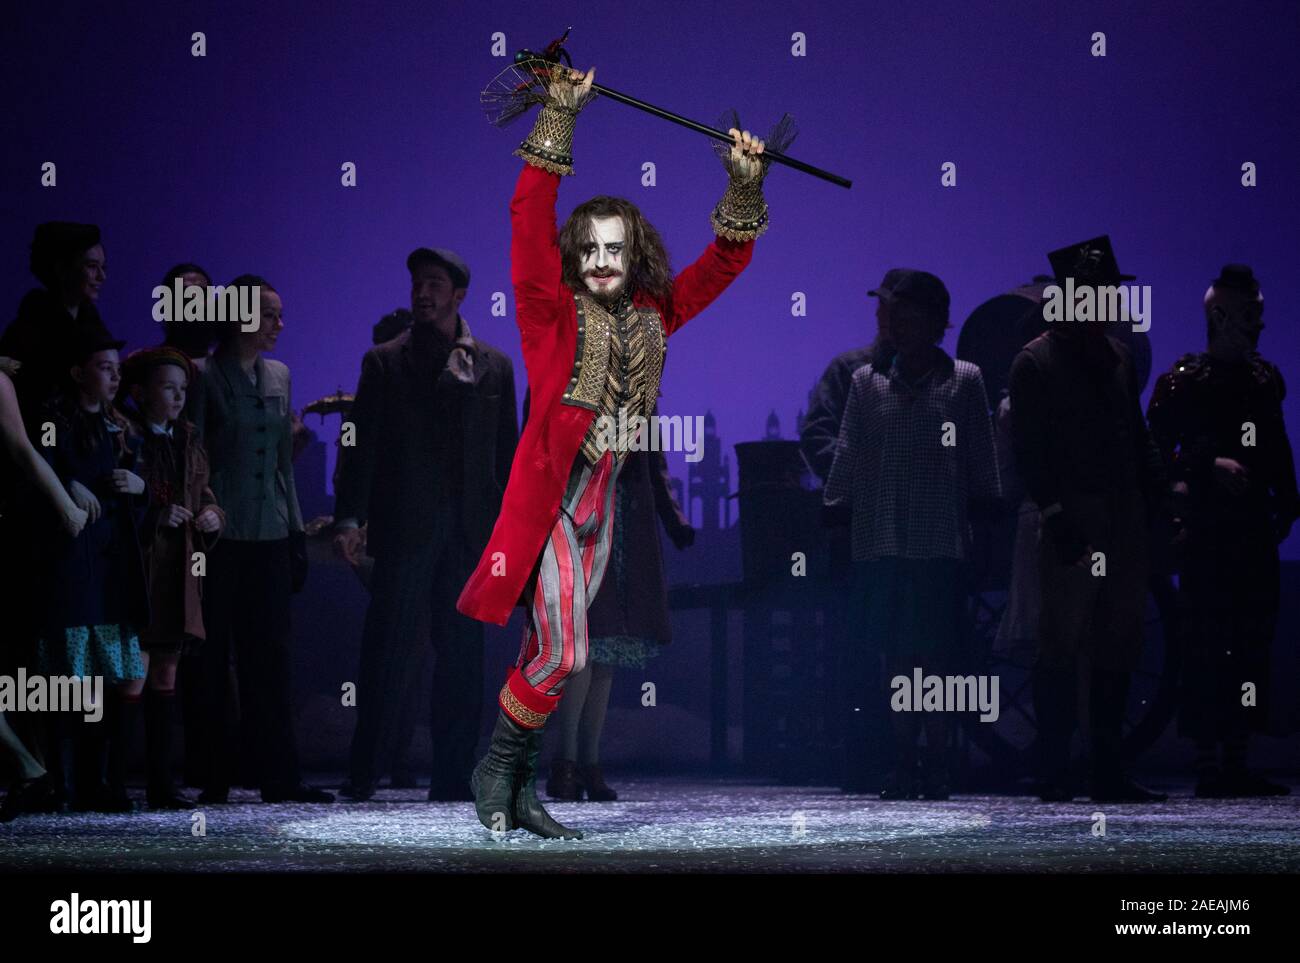 Dancer Bruno Micchiardi, as the Ringmaster, from Scottish Ballet performs on stage during a dress rehearsal of The Snow Queen at Festival Theatre, Edinburgh. Inspired by Hans Christian Andersen's fairy tale, the ballet is set to the music of Rimsky-Korsakov performed by the Scottish Ballet Orchestra and runs until December 29, 2019. Stock Photo